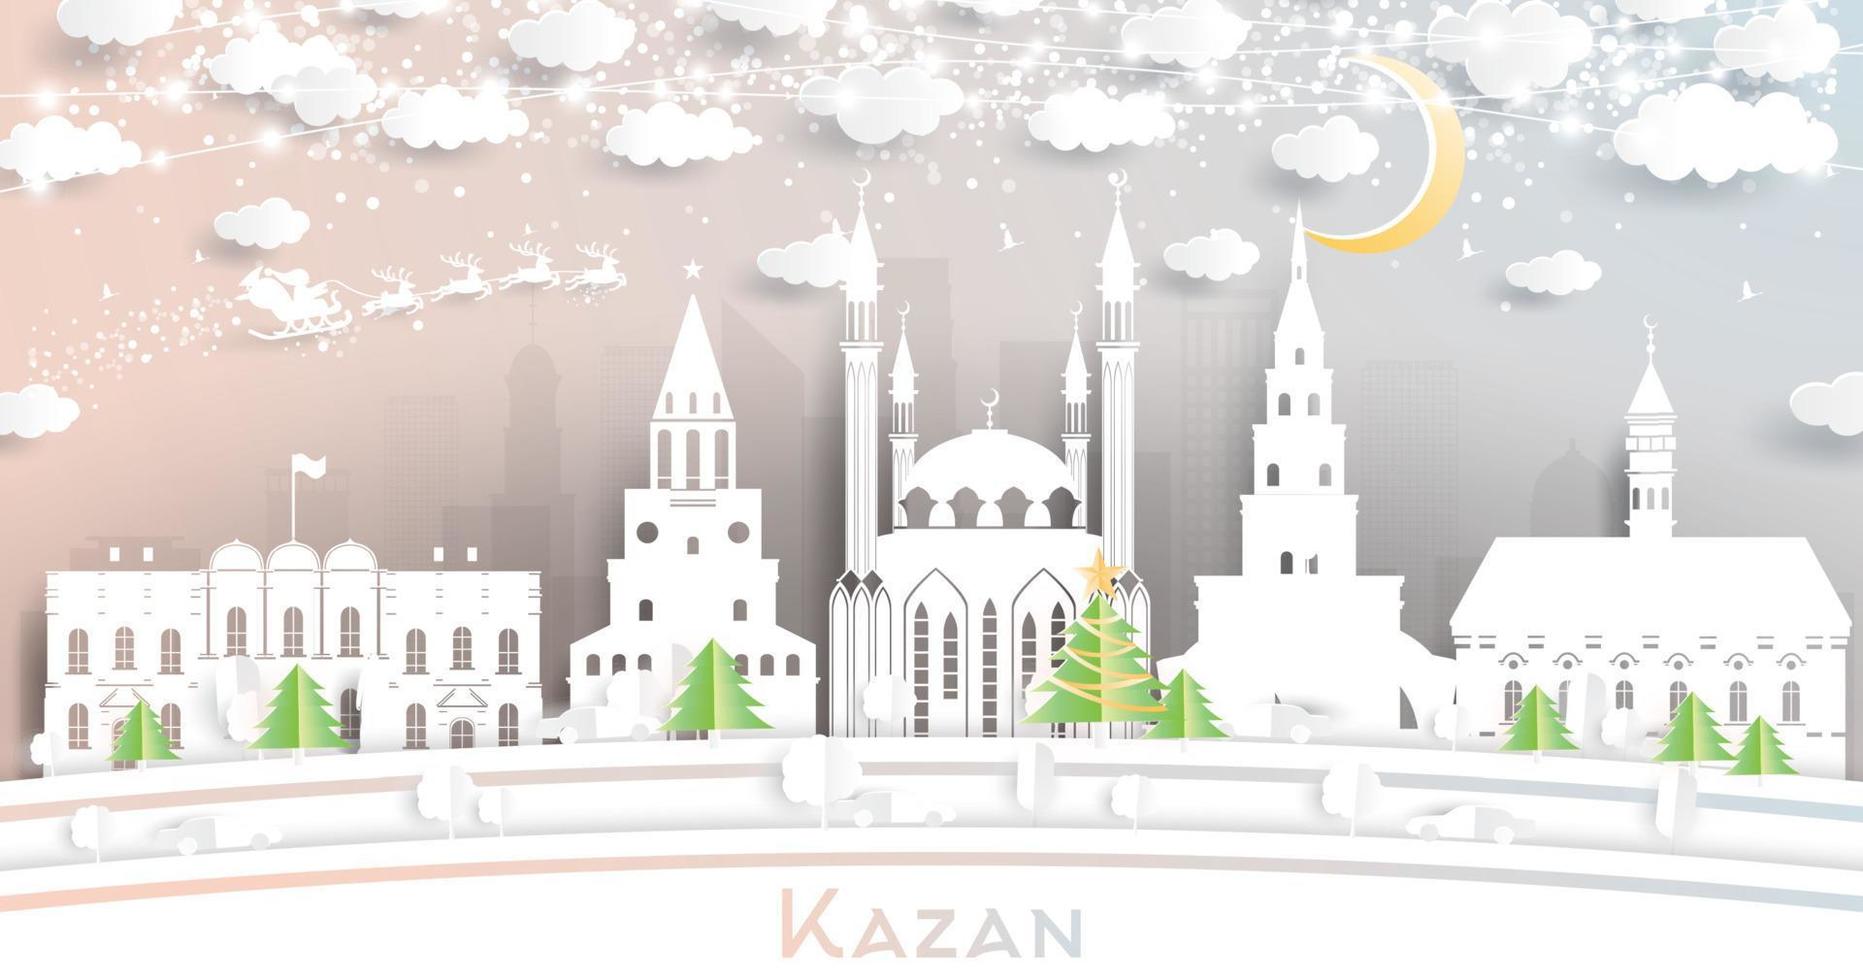 Kazan Russia City Skyline in Paper Cut Style with Snowflakes, Moon and Neon Garland. vector